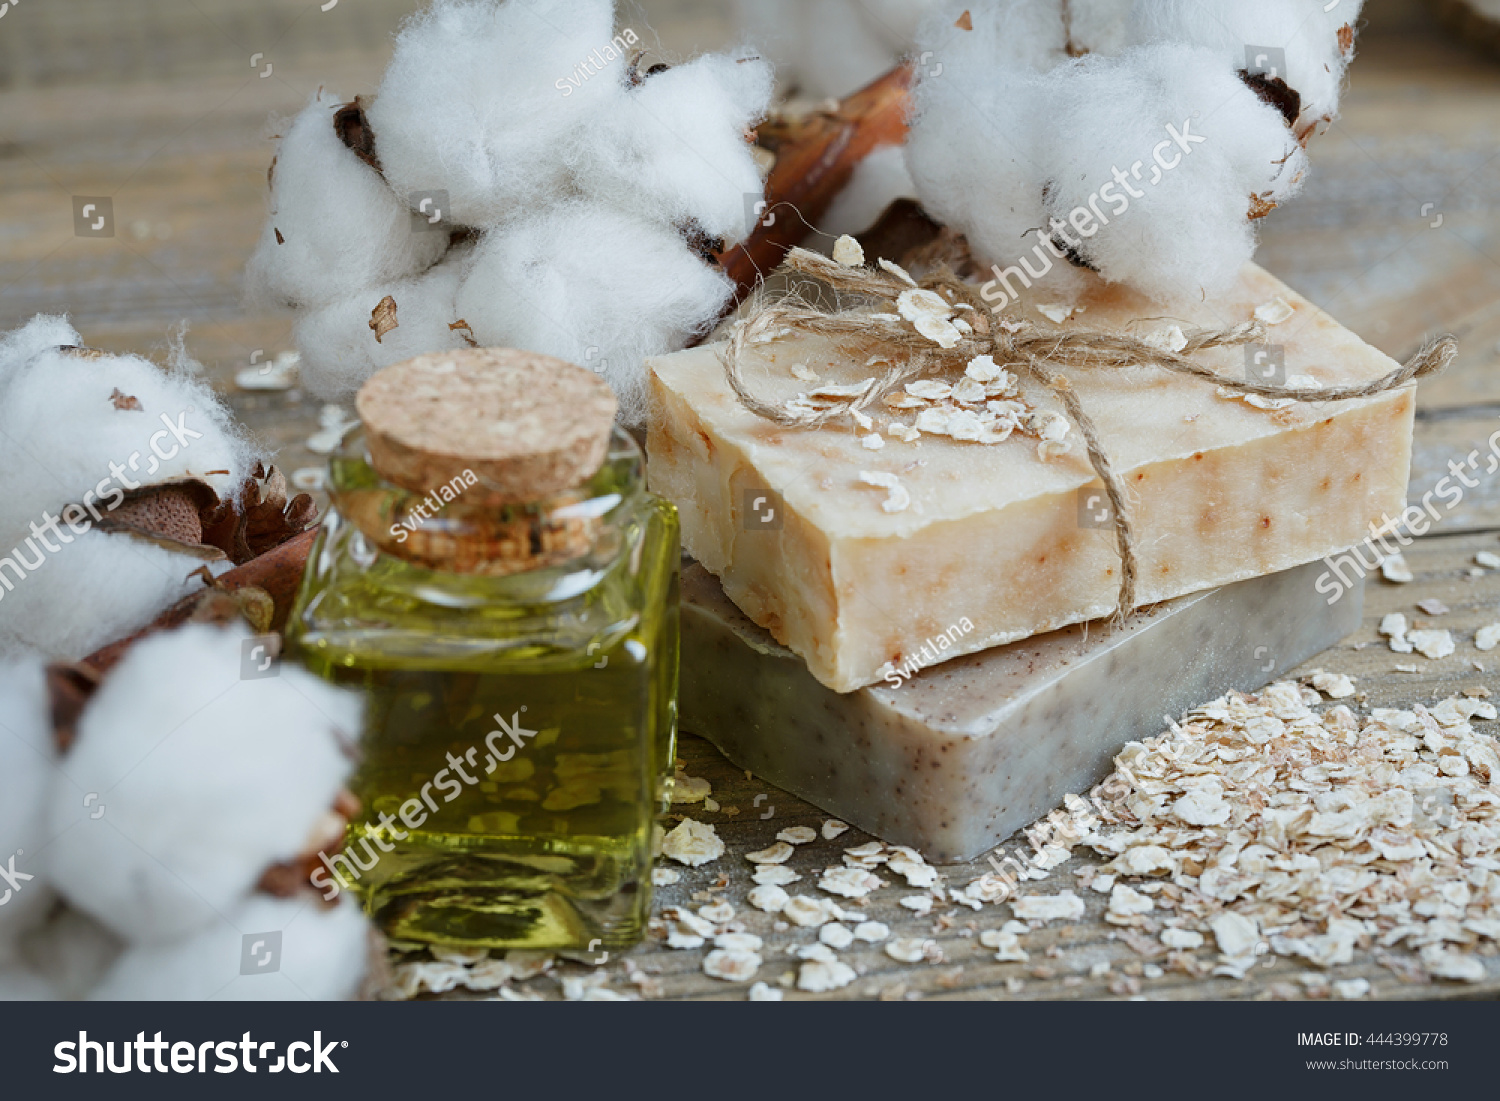 Natural handmade soap, oat flakes, aromatic oil and cotton branch on wooden background. Spa concept. #444399778